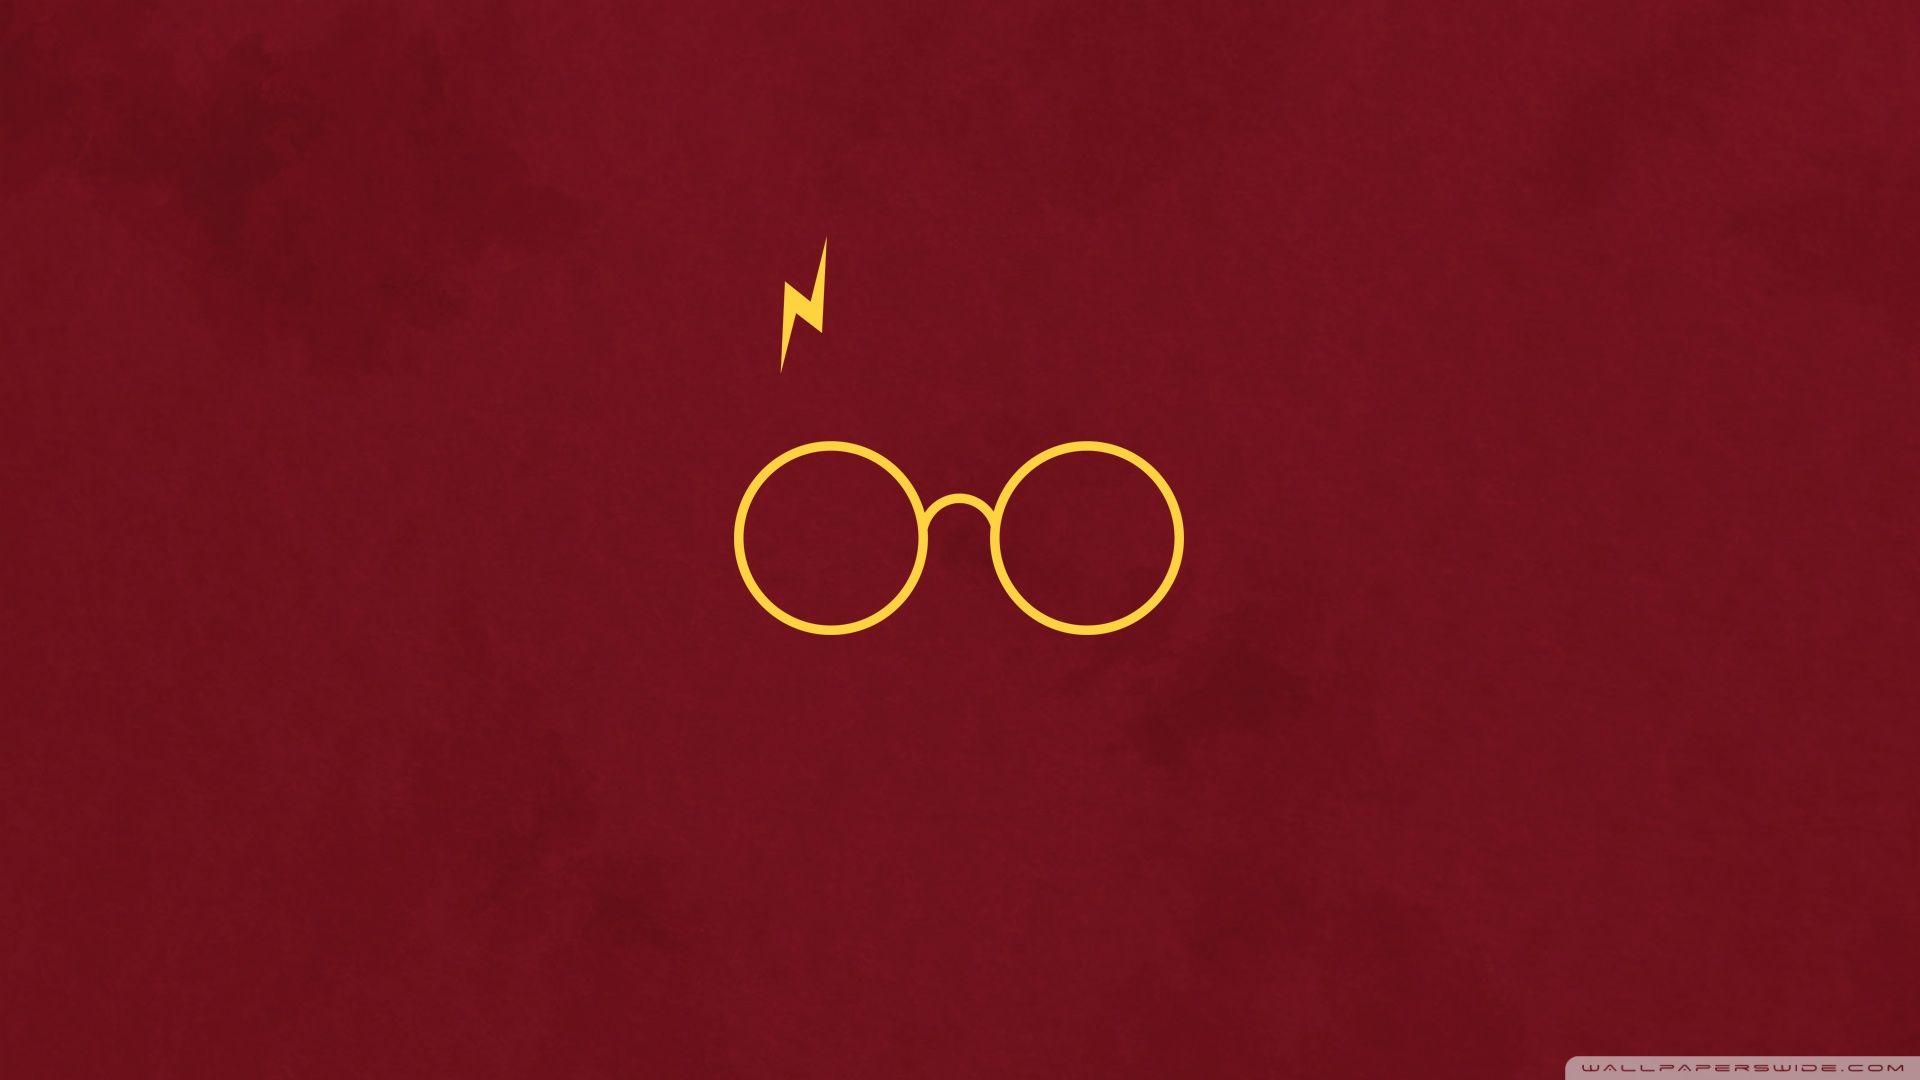 Harry Potter 9 Wallpapers - Wallpaper Cave